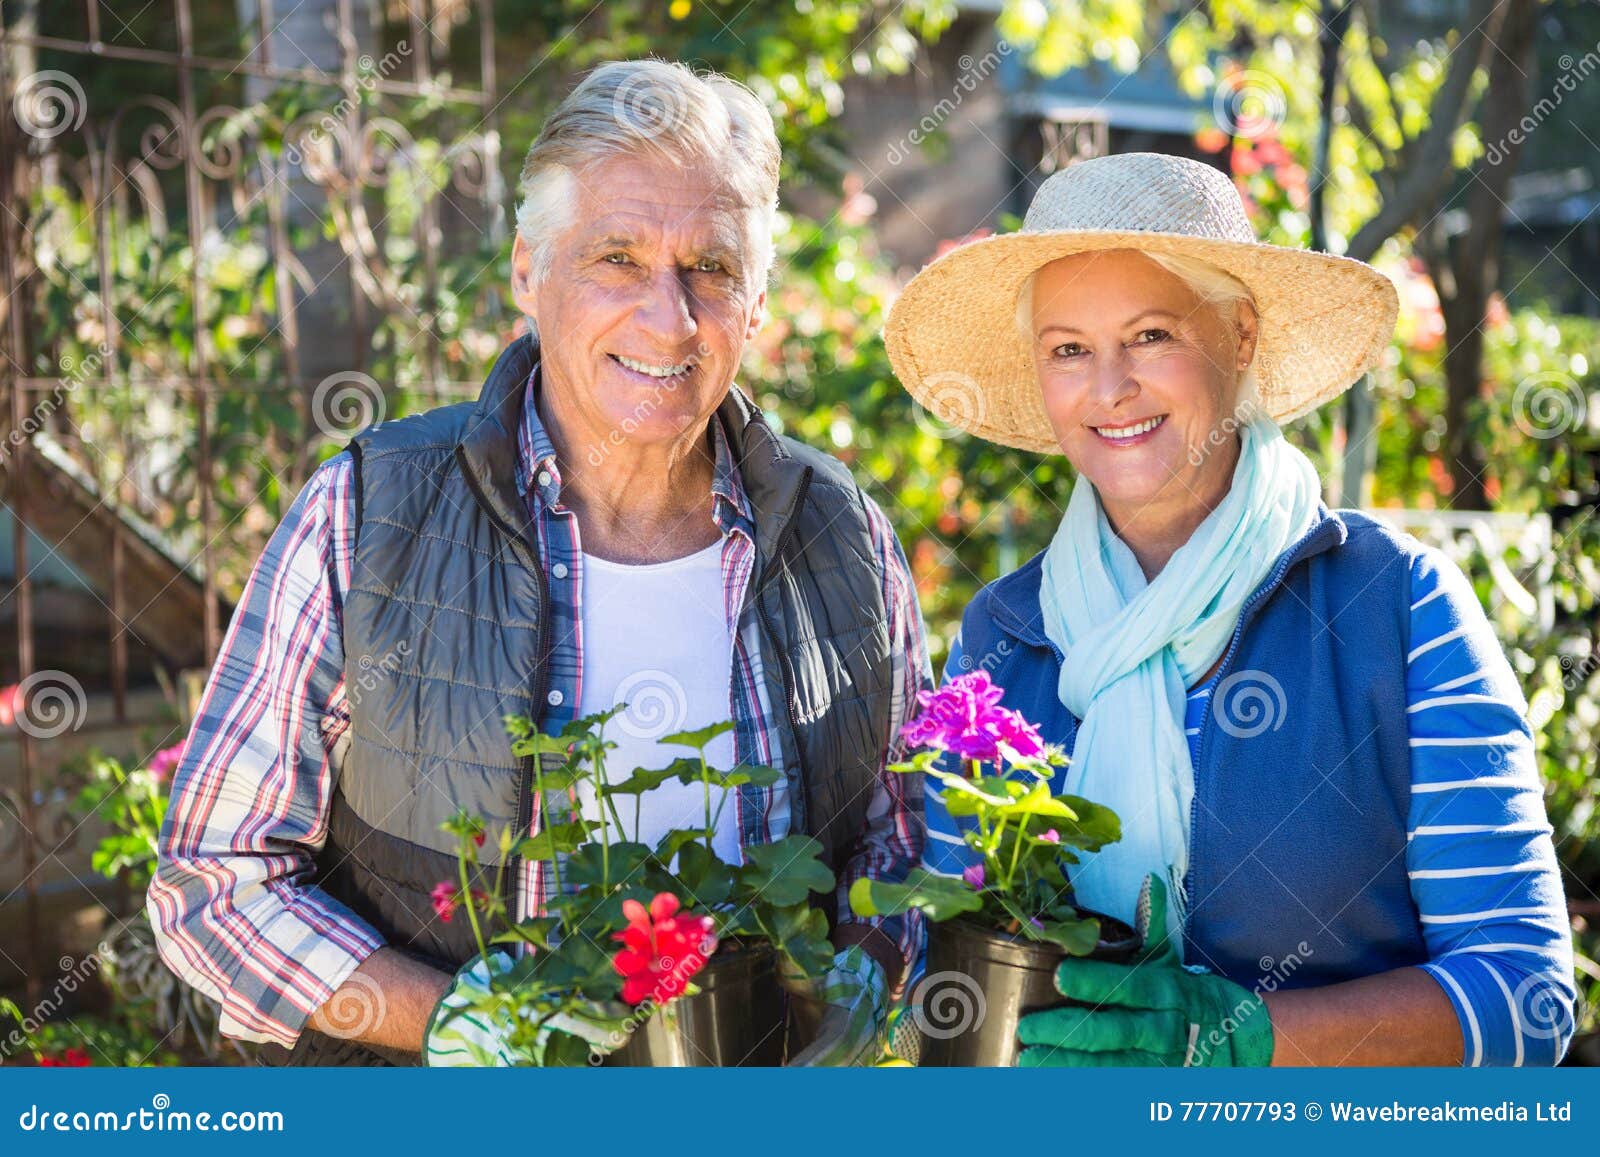 Portrait of Happy Couple Holding Potted Plants at Garden Stock Image ...